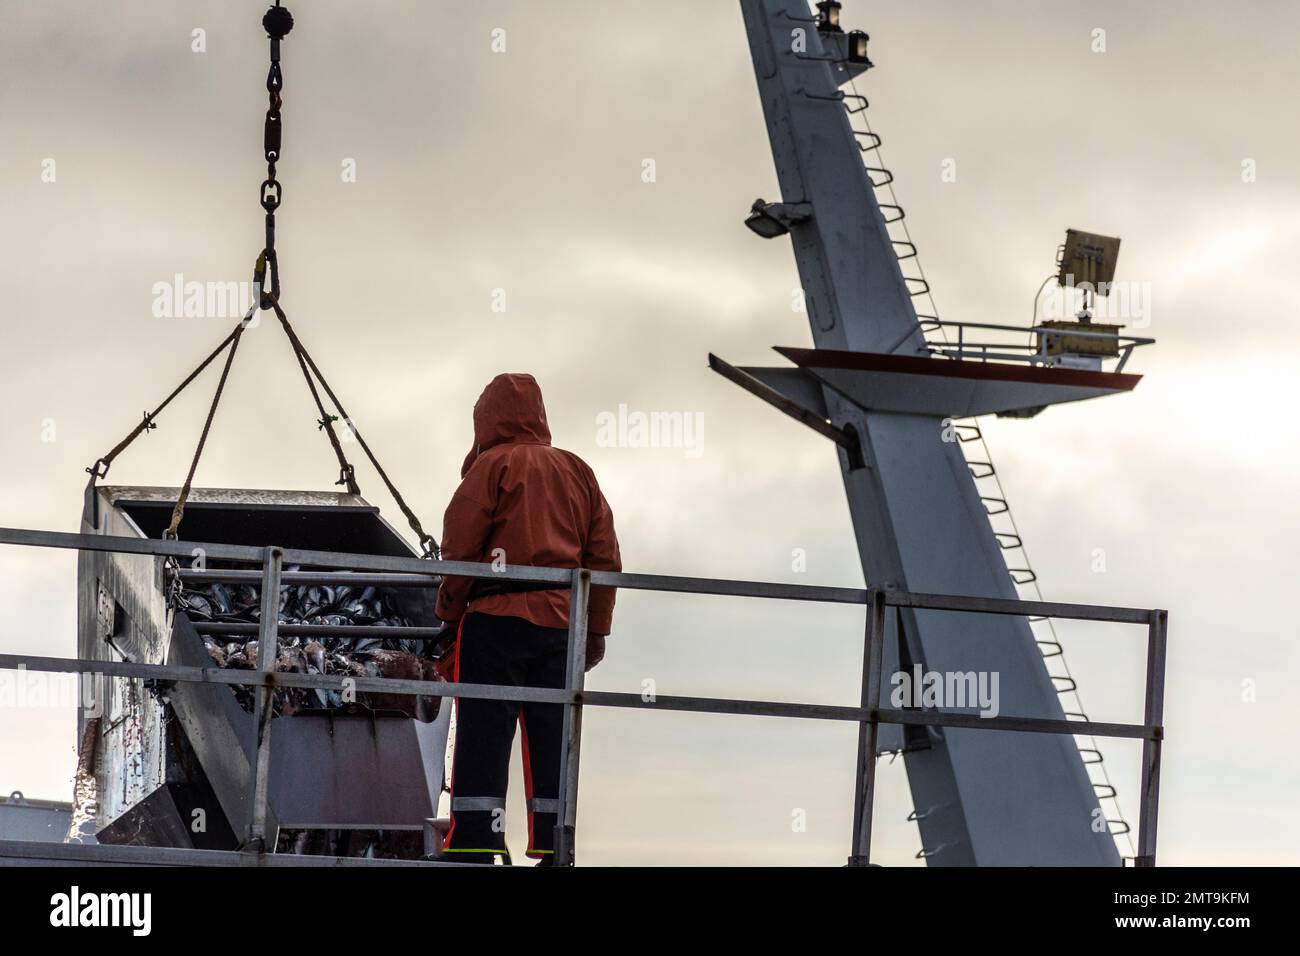 Unloading fish from ANTARCTIC  super trawler in Killybegs, County Donegal, Ireland. Stock Photo